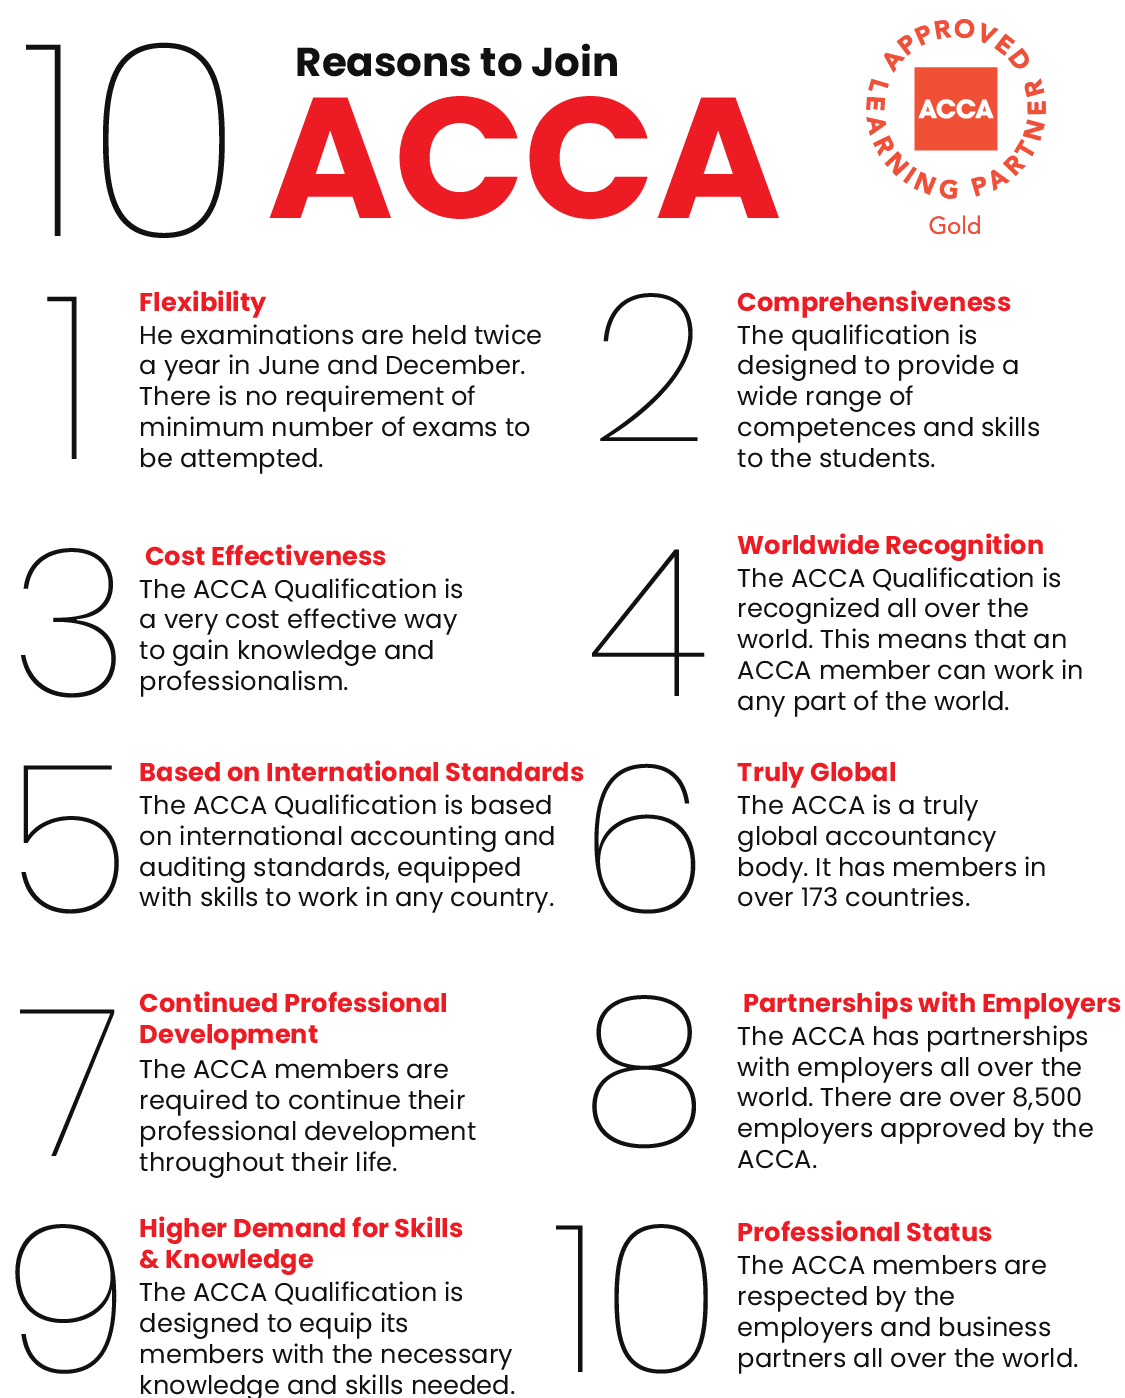 ACCA in Pakistan